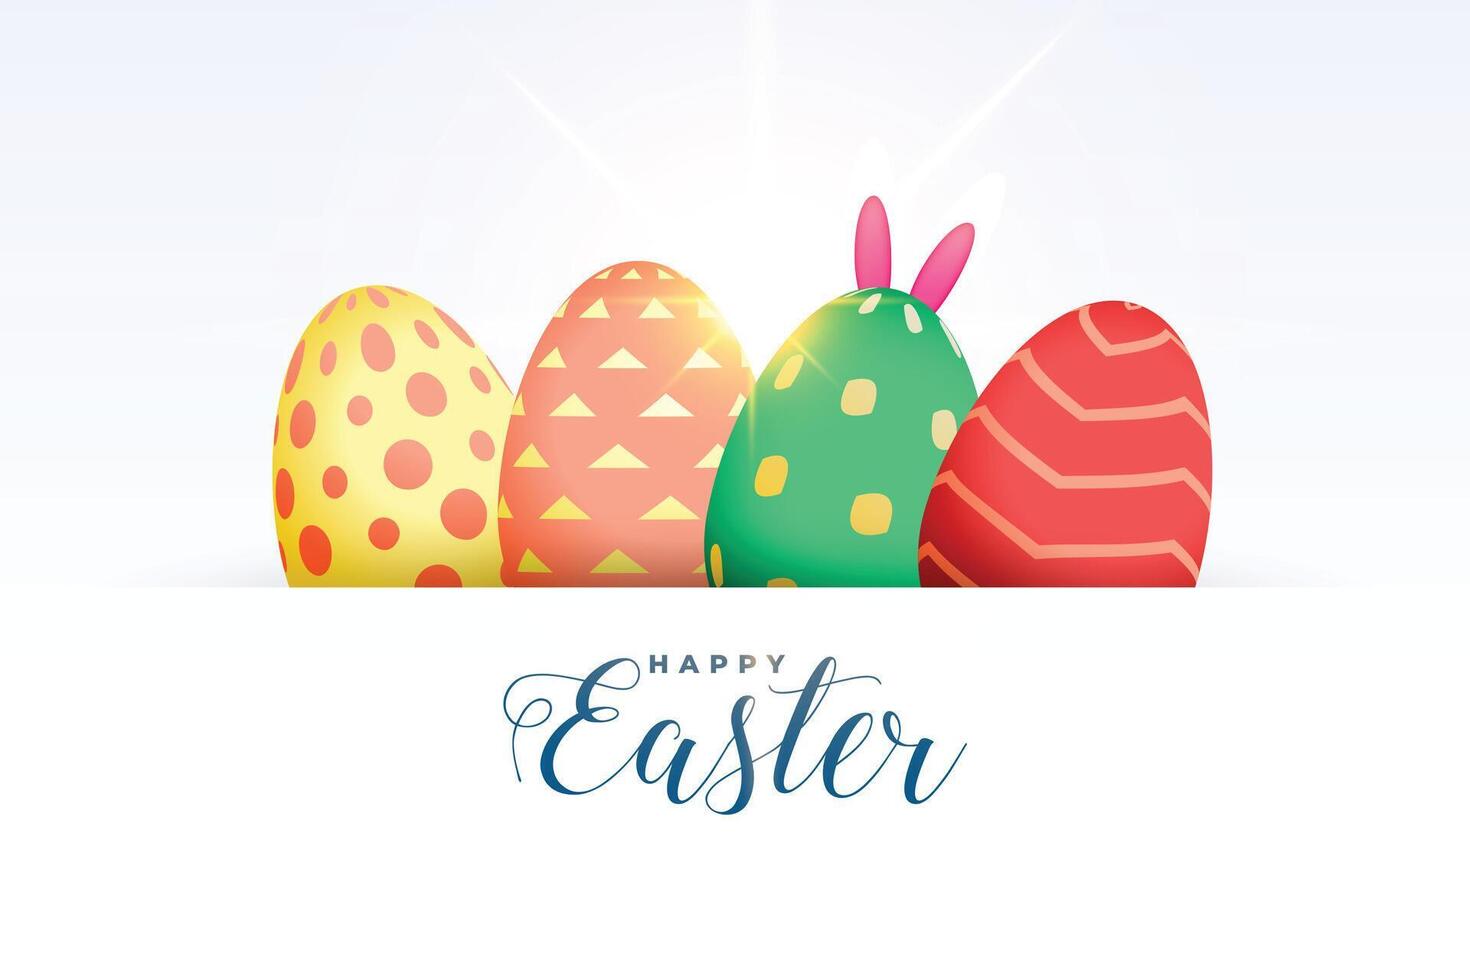 happy easter colorful eggs greeting with bunny rabbit ears vector